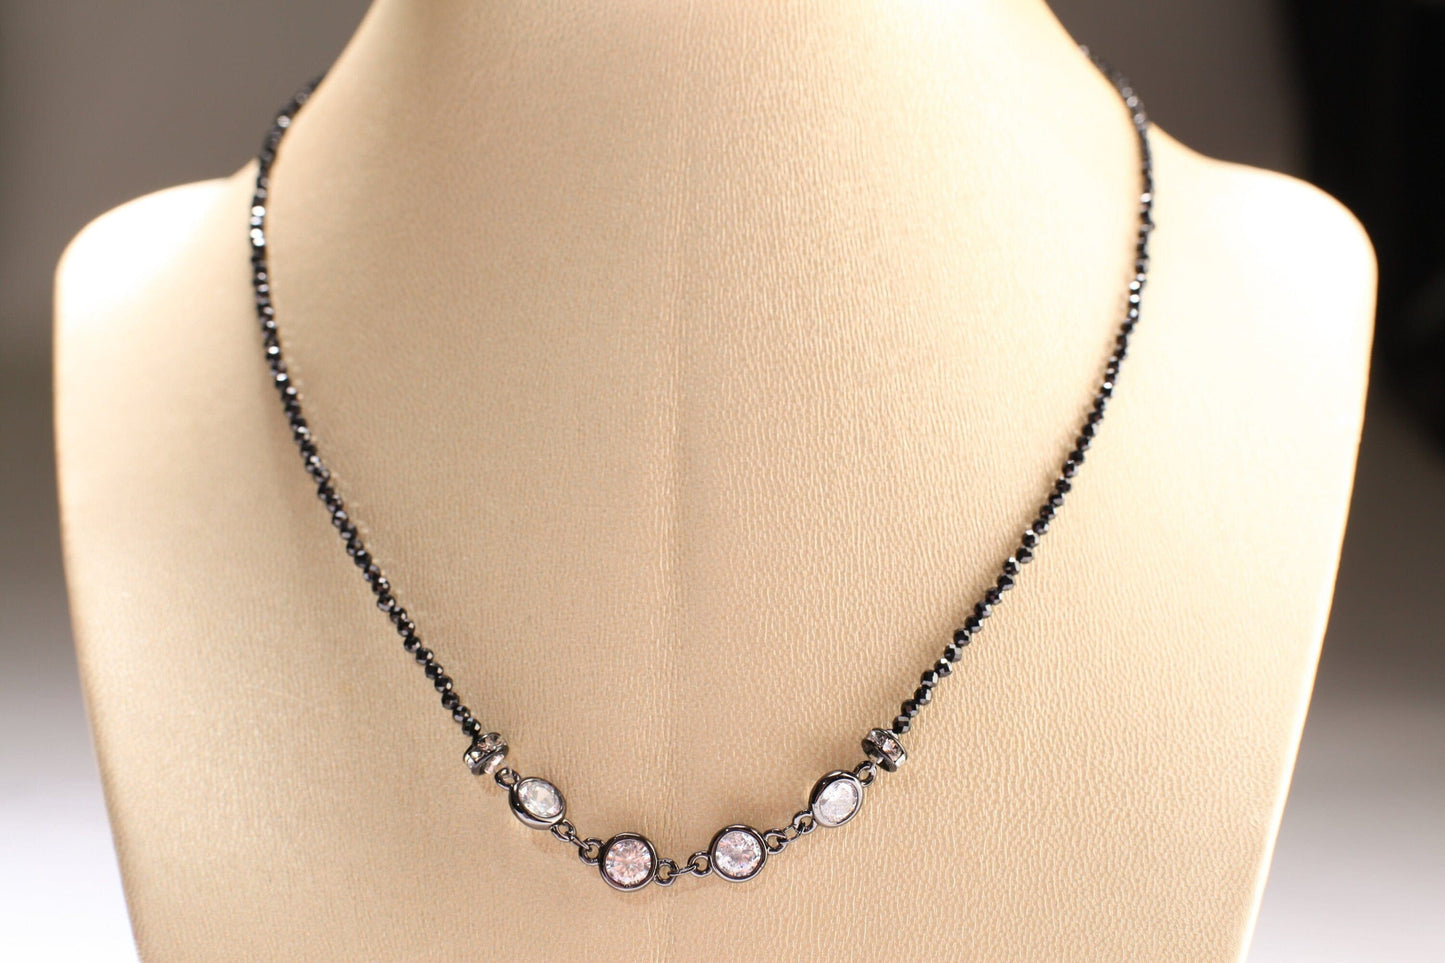 Black Spinel Diamond Cut Choker Necklace with 6.5mm Cubic Zirconia Disk and Rhinestone Spacers Necklace,